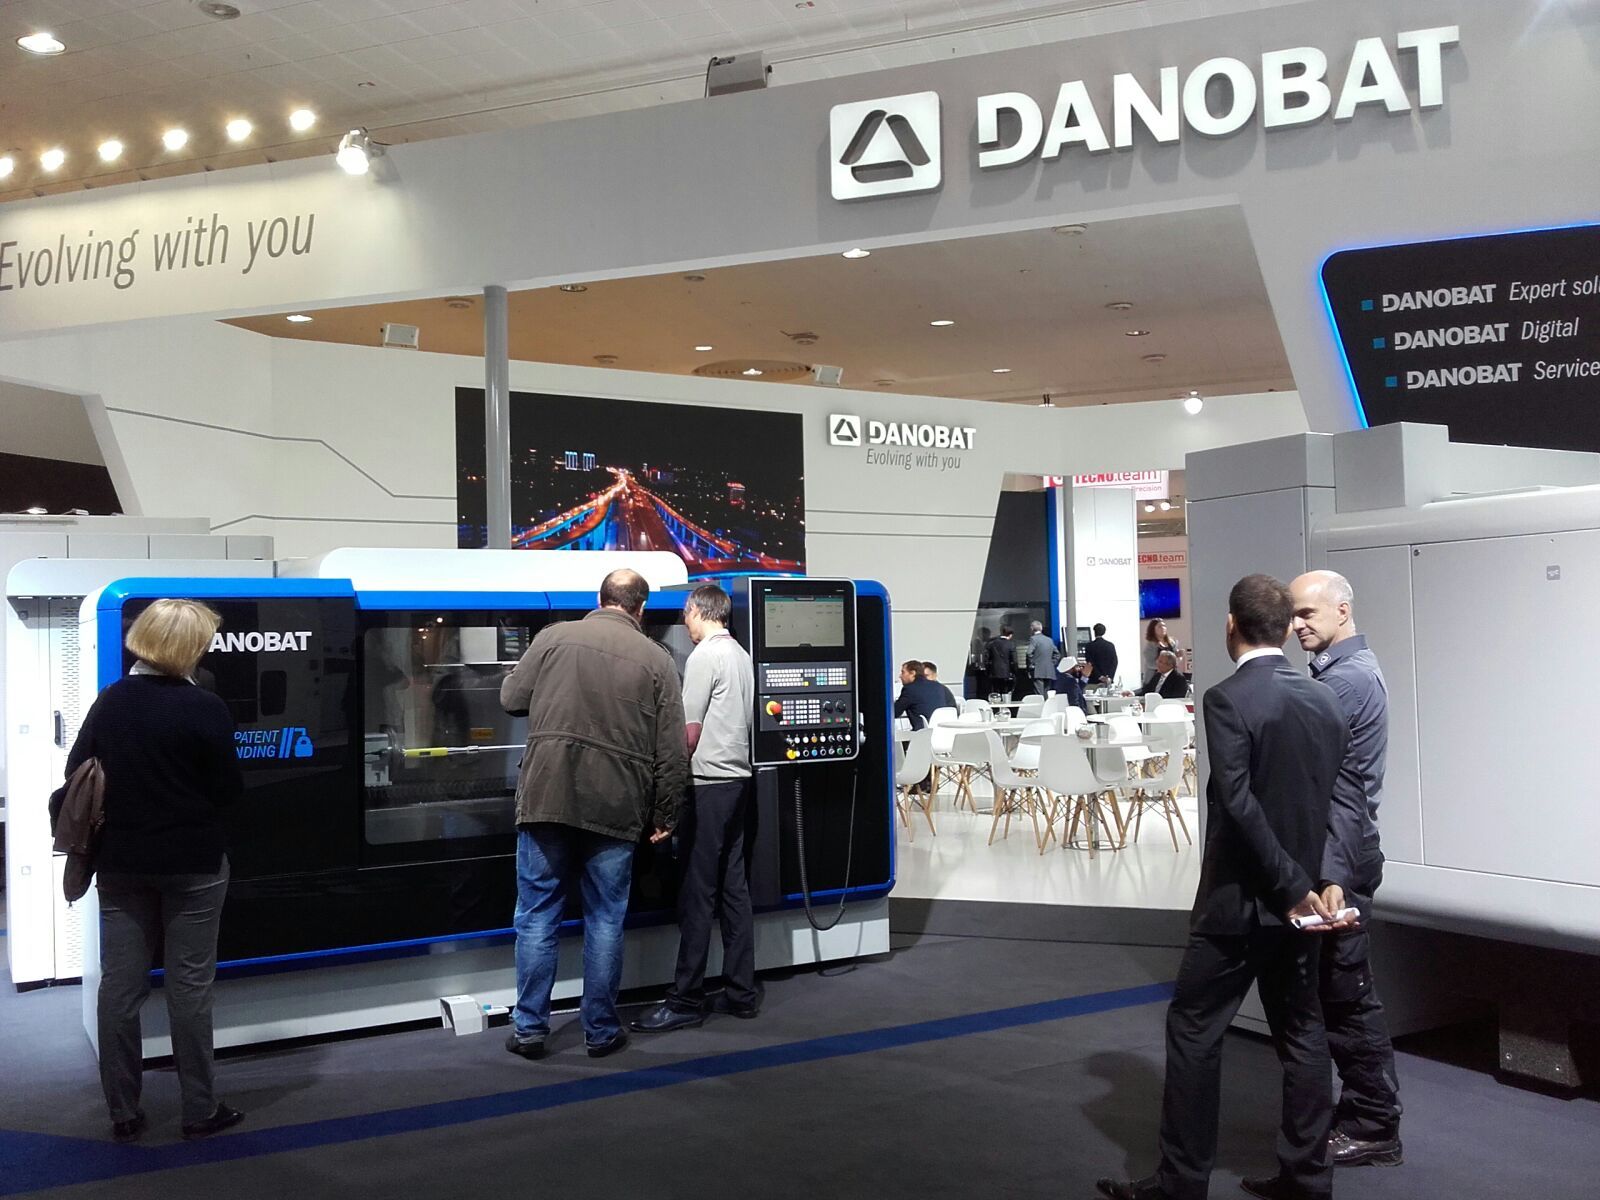 DANOBAT showcases its focus on industrial digitalisation and the development of advanced manufacturing solutions at EMO in Hannover